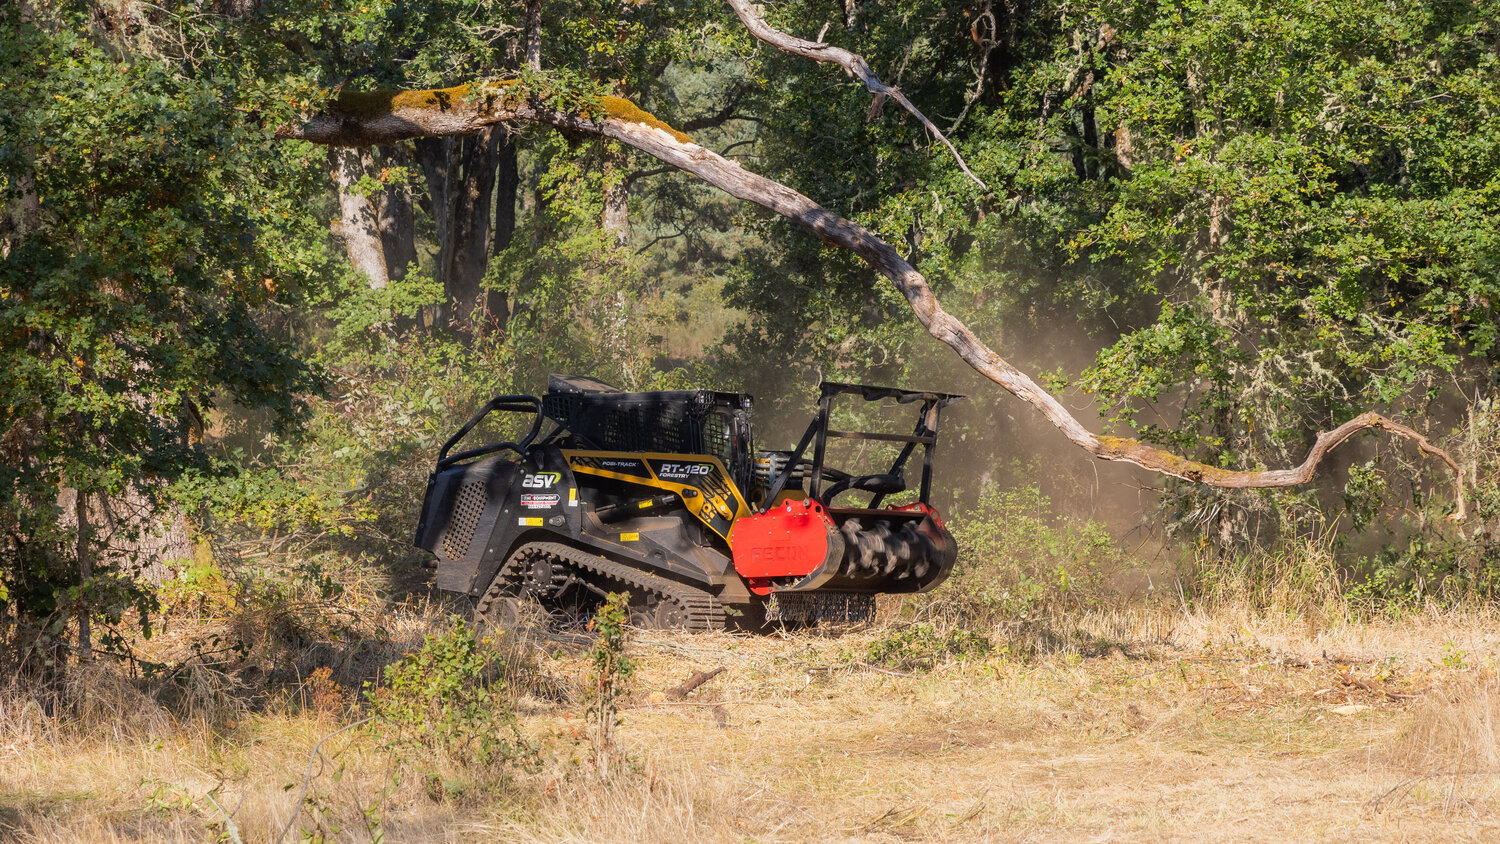 A masticator is used to clear vegetation for prescribed burning at West Rocky Prairie near Tenino on Thursday, Sept. 21.